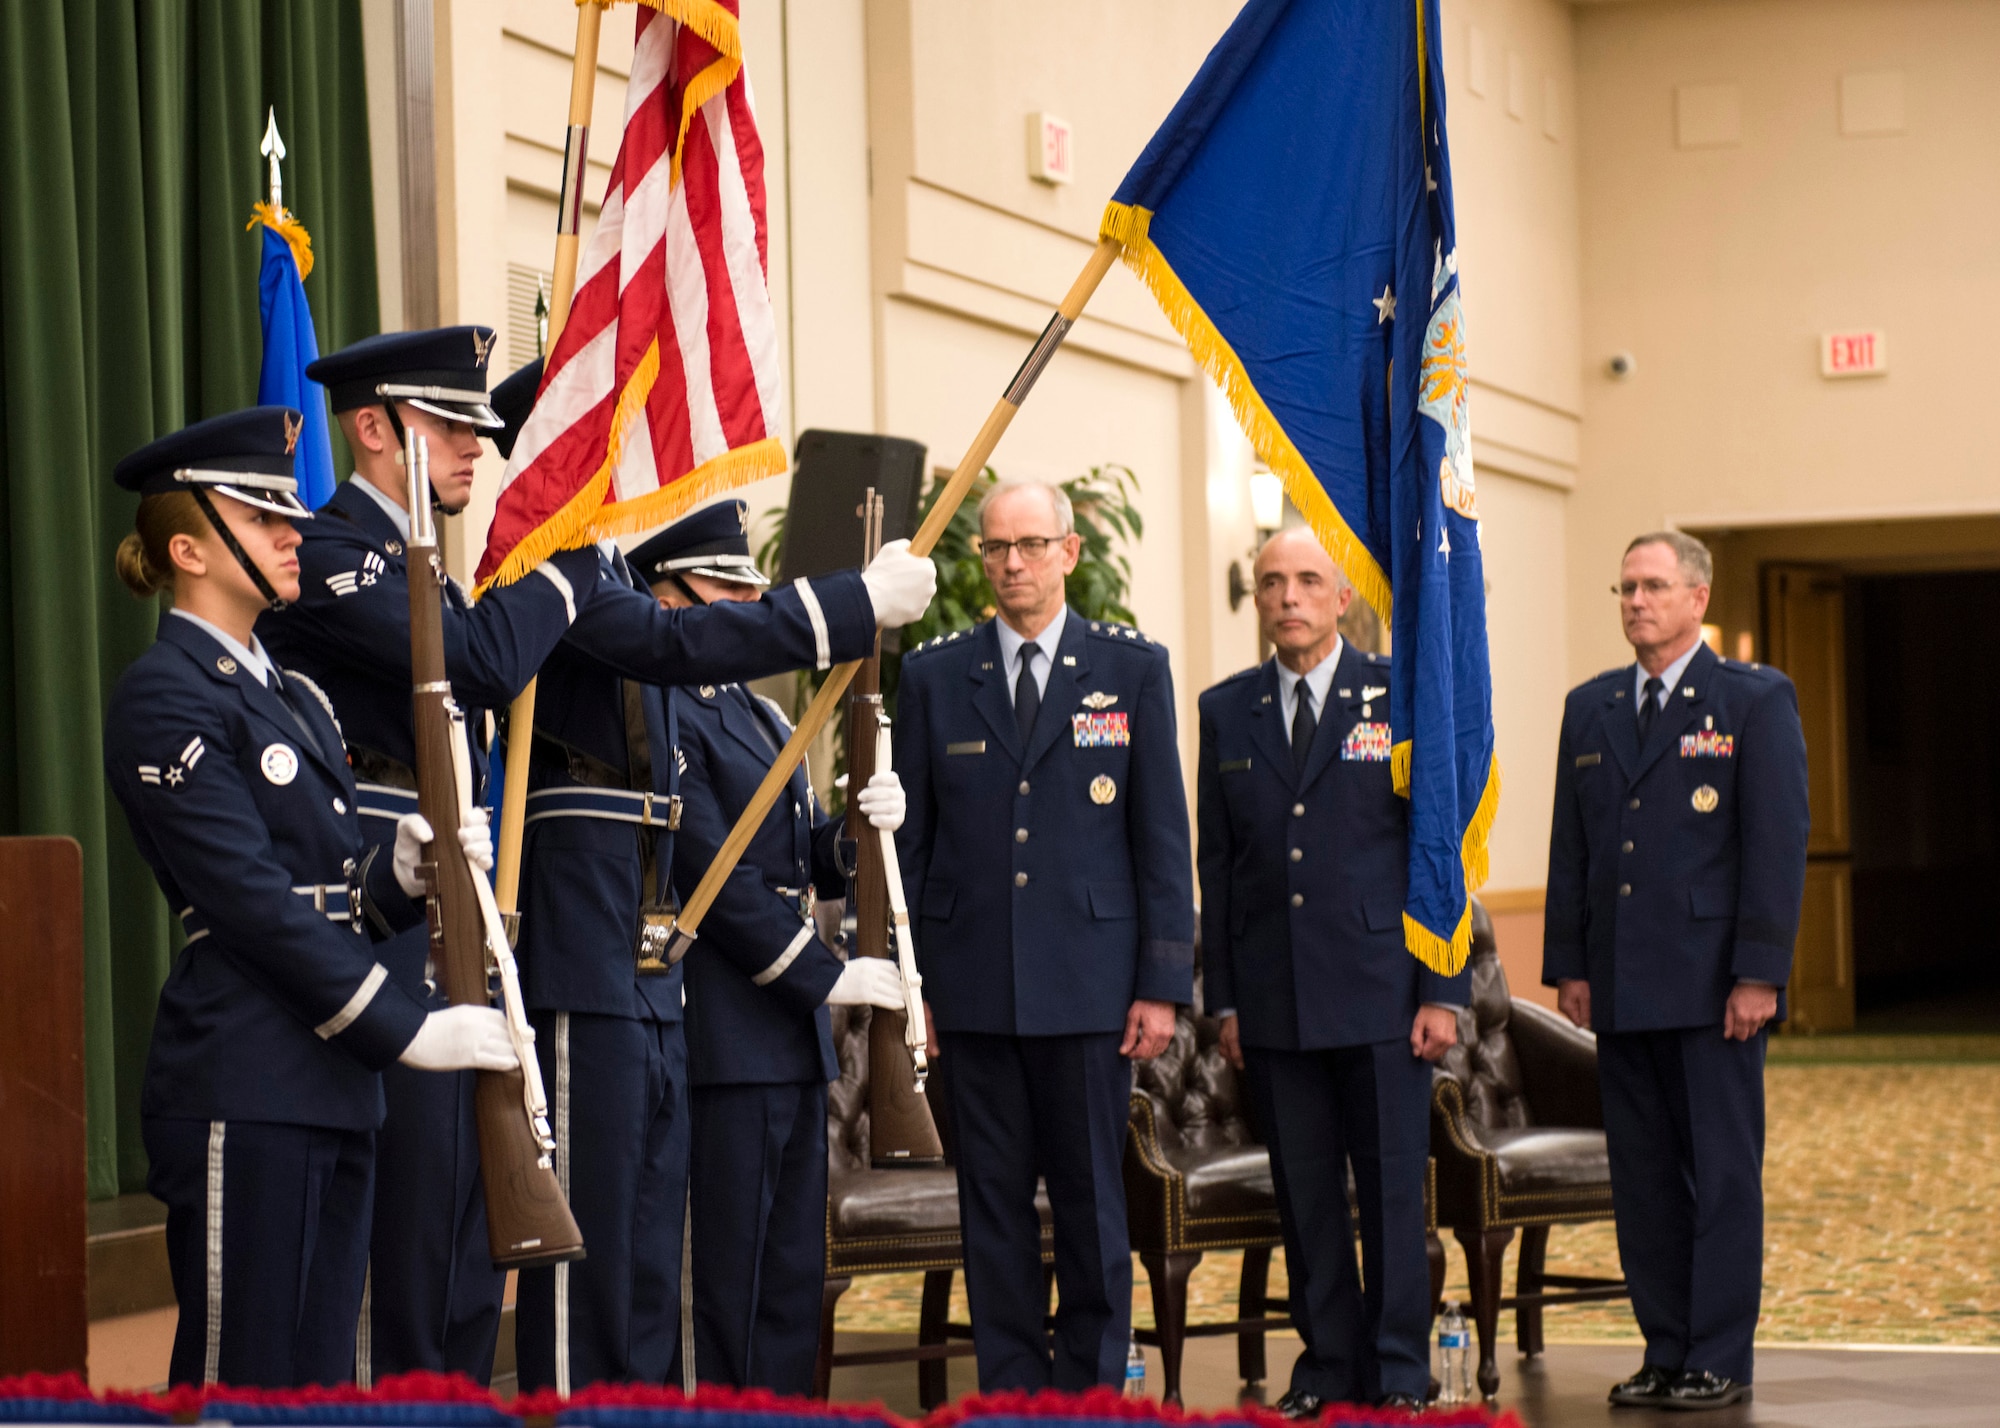 (From center to right) Lt. Gen. Mark A. Ediger, U.S. Air Force Surgeon General, Brig. Gen. (Dr.) Robert I. Miller, and Brig. Gen. James H. Dienst await the posting of the colors during the Air Force Medical Operations Agency (AFMOA) change of command at Joint Base San Antonio-Lackland, Texas, May 22, 2018. AFMOA oversees the execution of Air Force expeditionary capabilities and healthcare operations. Miller relinquished command of AFMOA to Dienst. (U.S. Air Force photo by Staff Sgt. Kevin Iinuma)